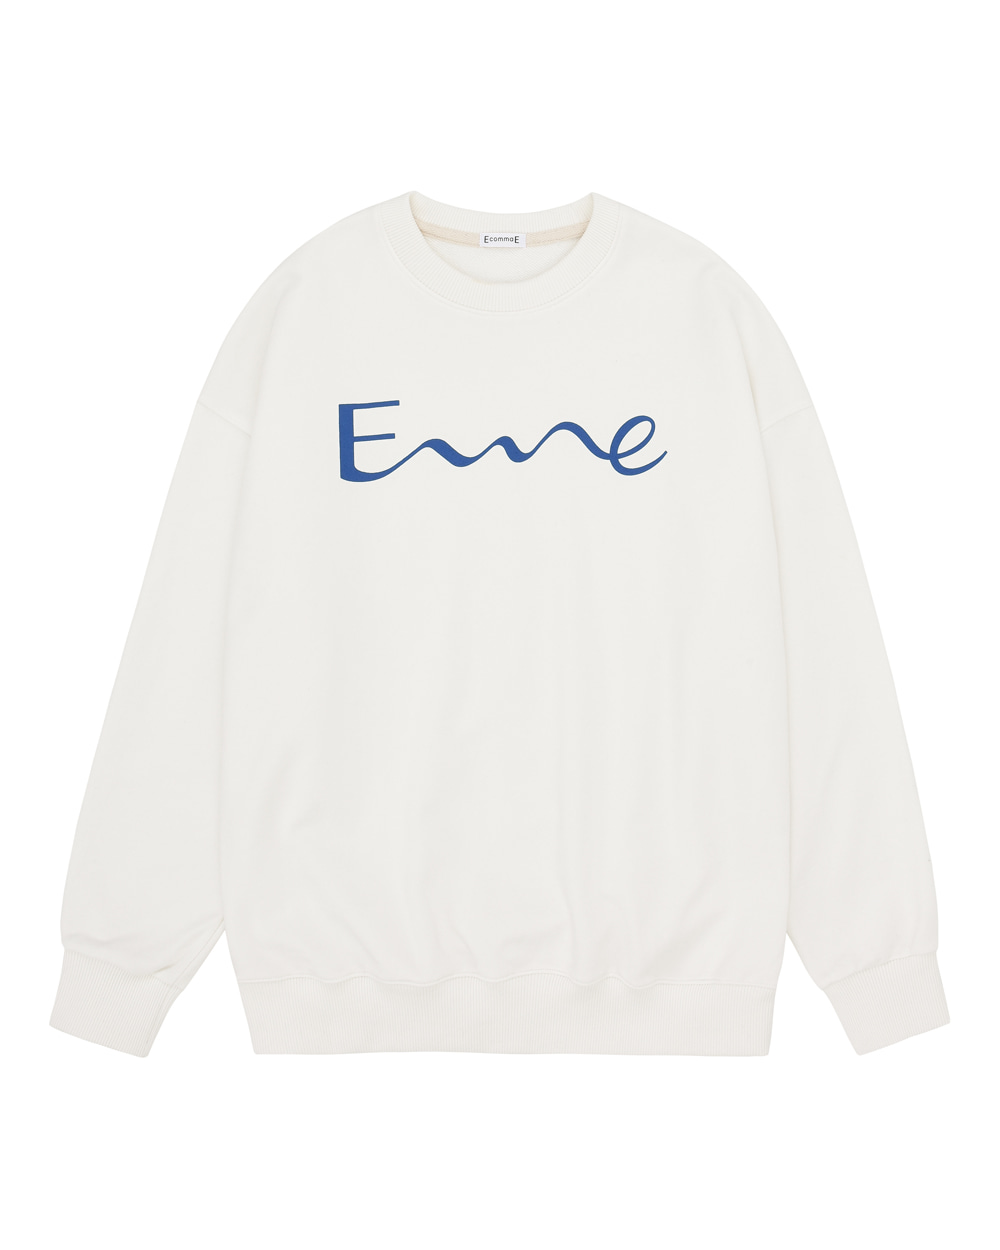 SIGNATURE OVER SIZED SWEAT-SHIRT (WHITE) (3colors)